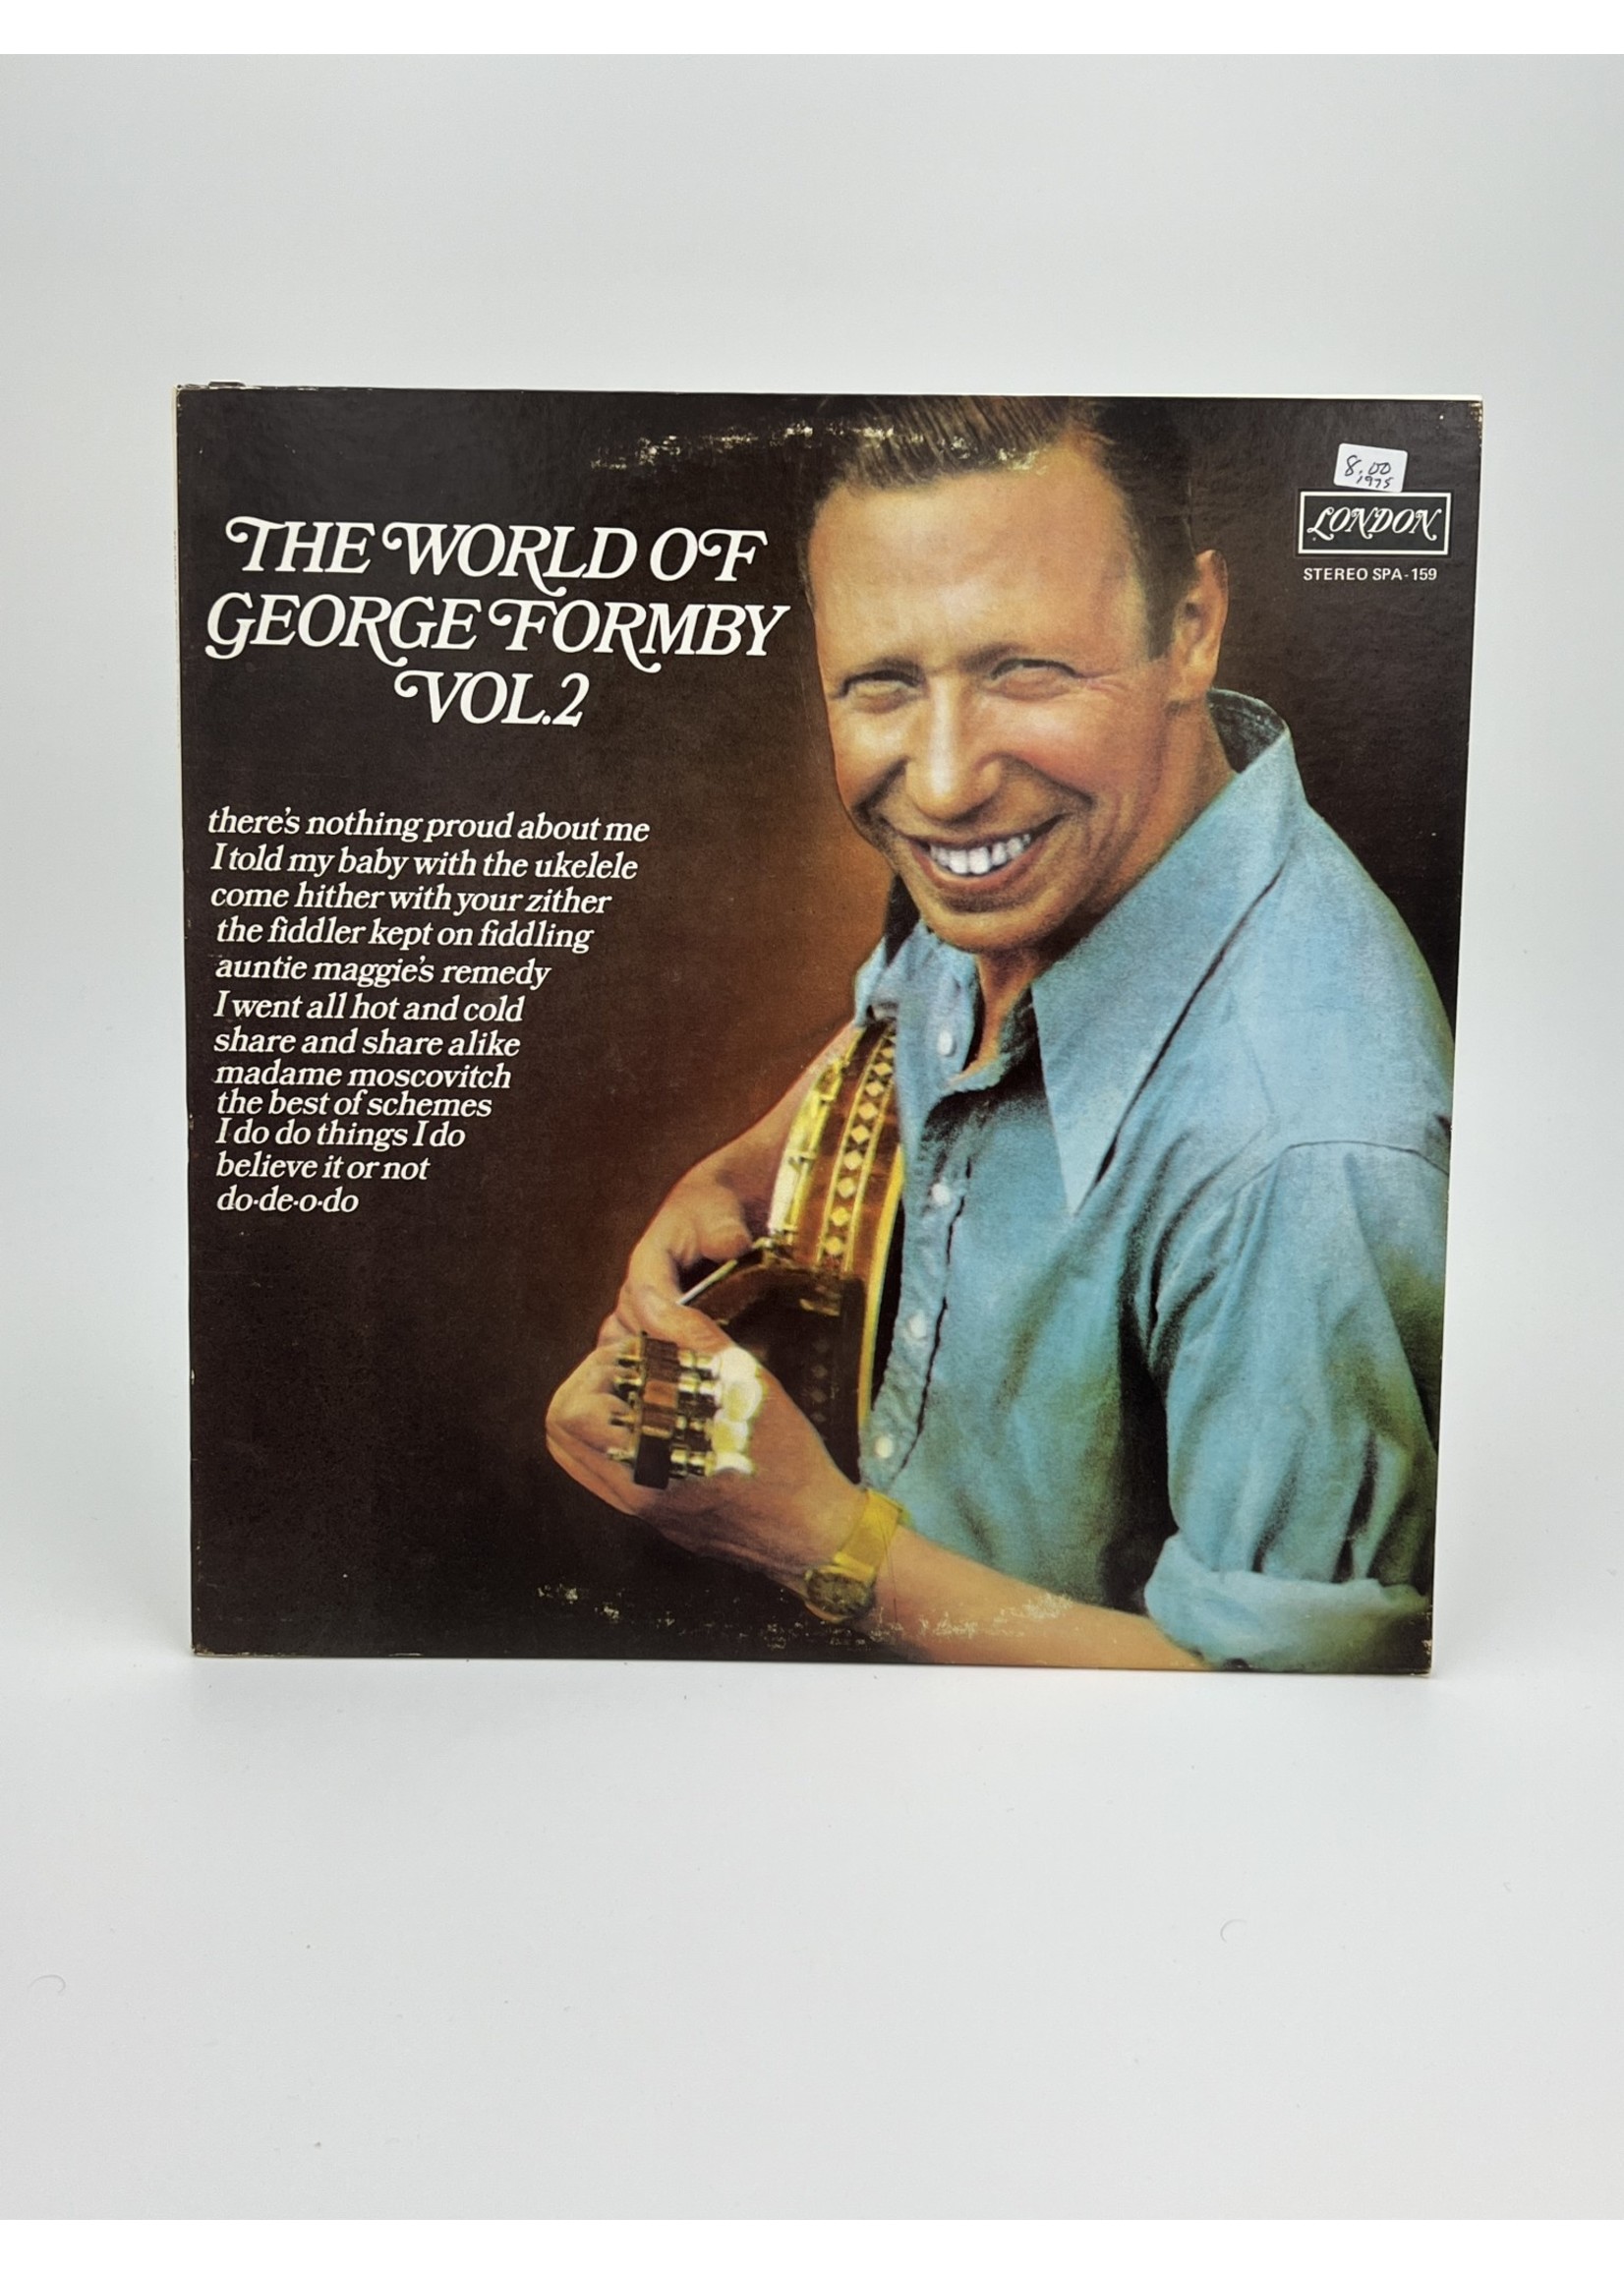 LP The World of George Formby Volume 2 LP Record